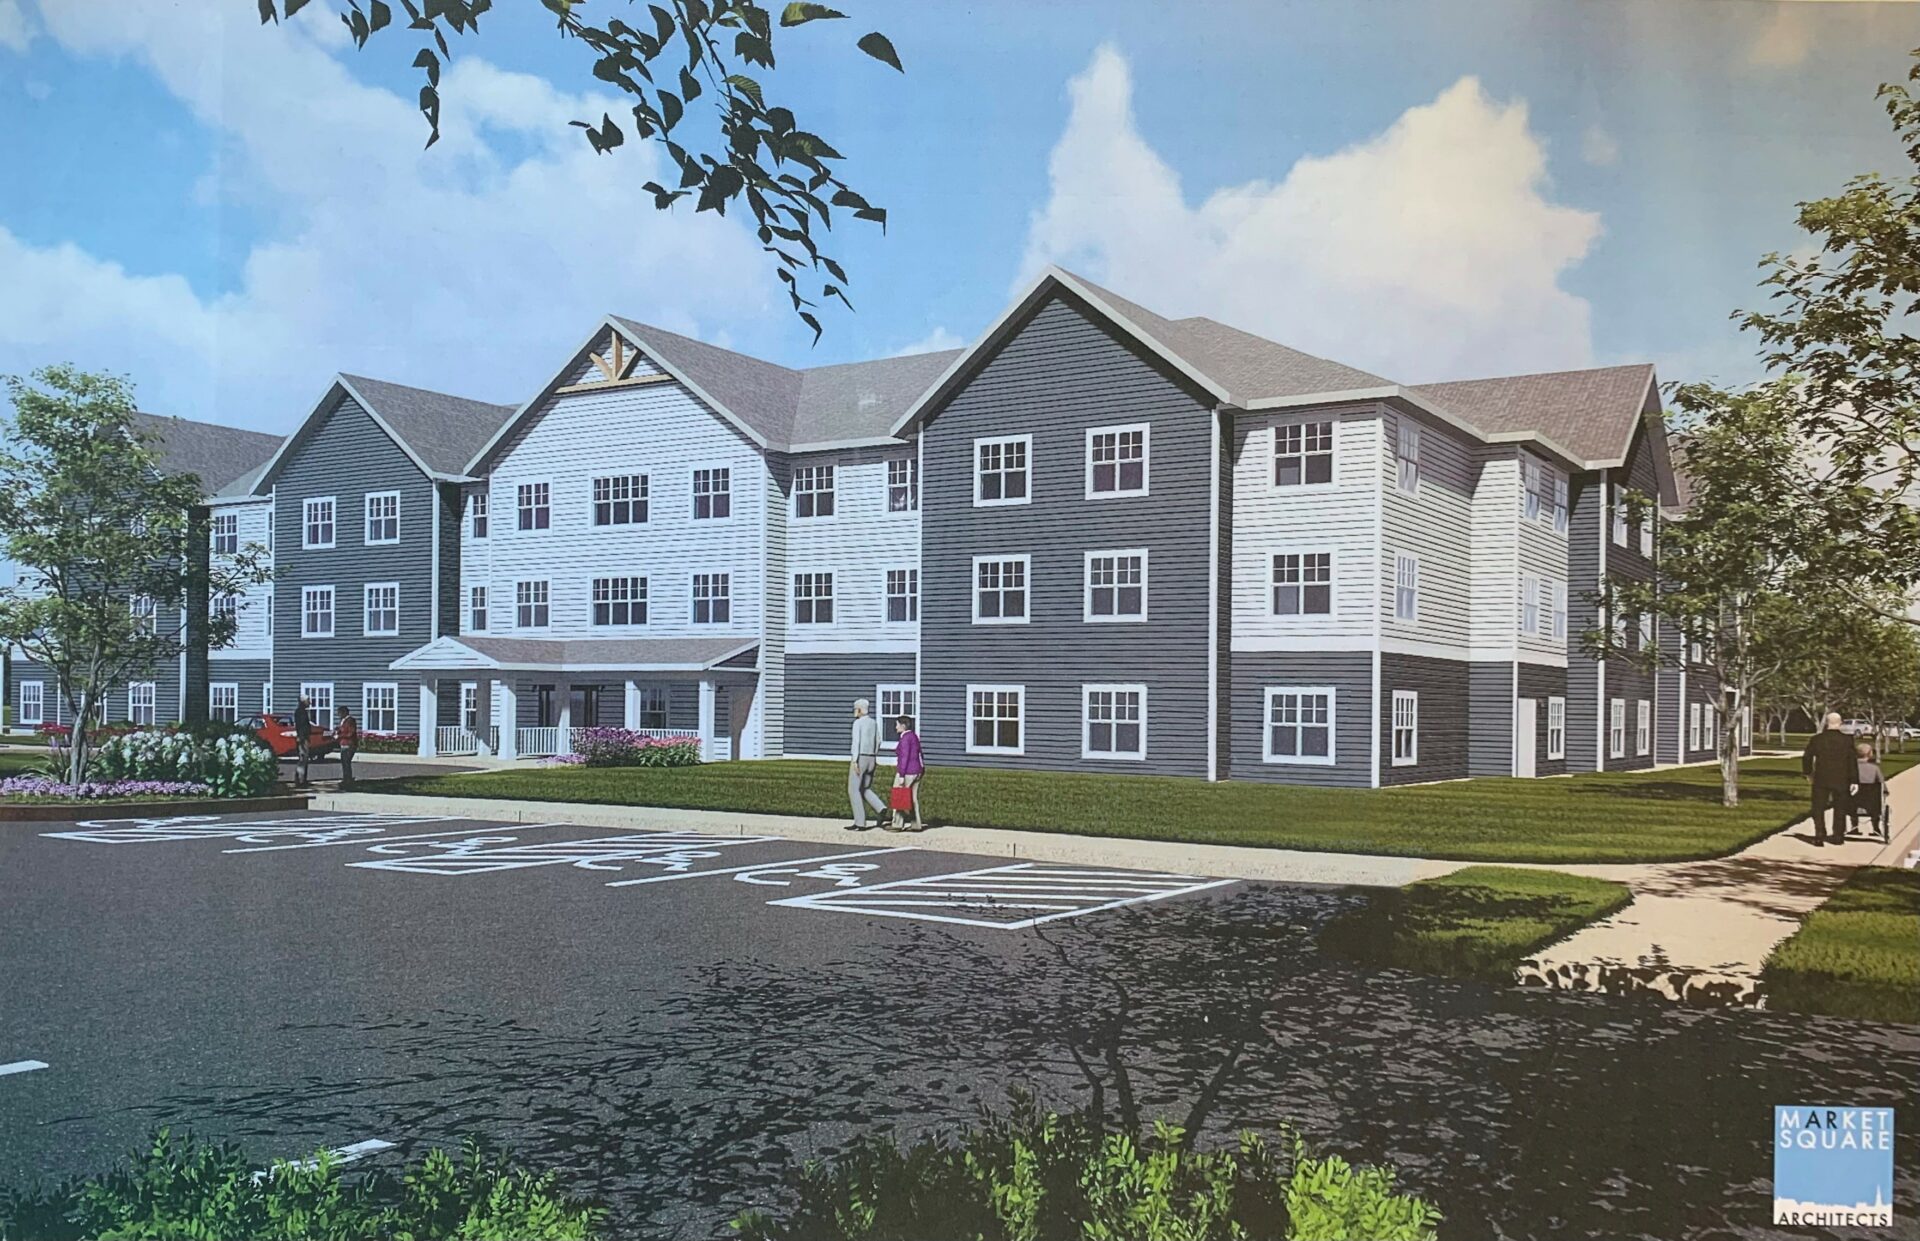 Market Square Architects’ Easterseals Nh Champlin Place Groundbreaking Project